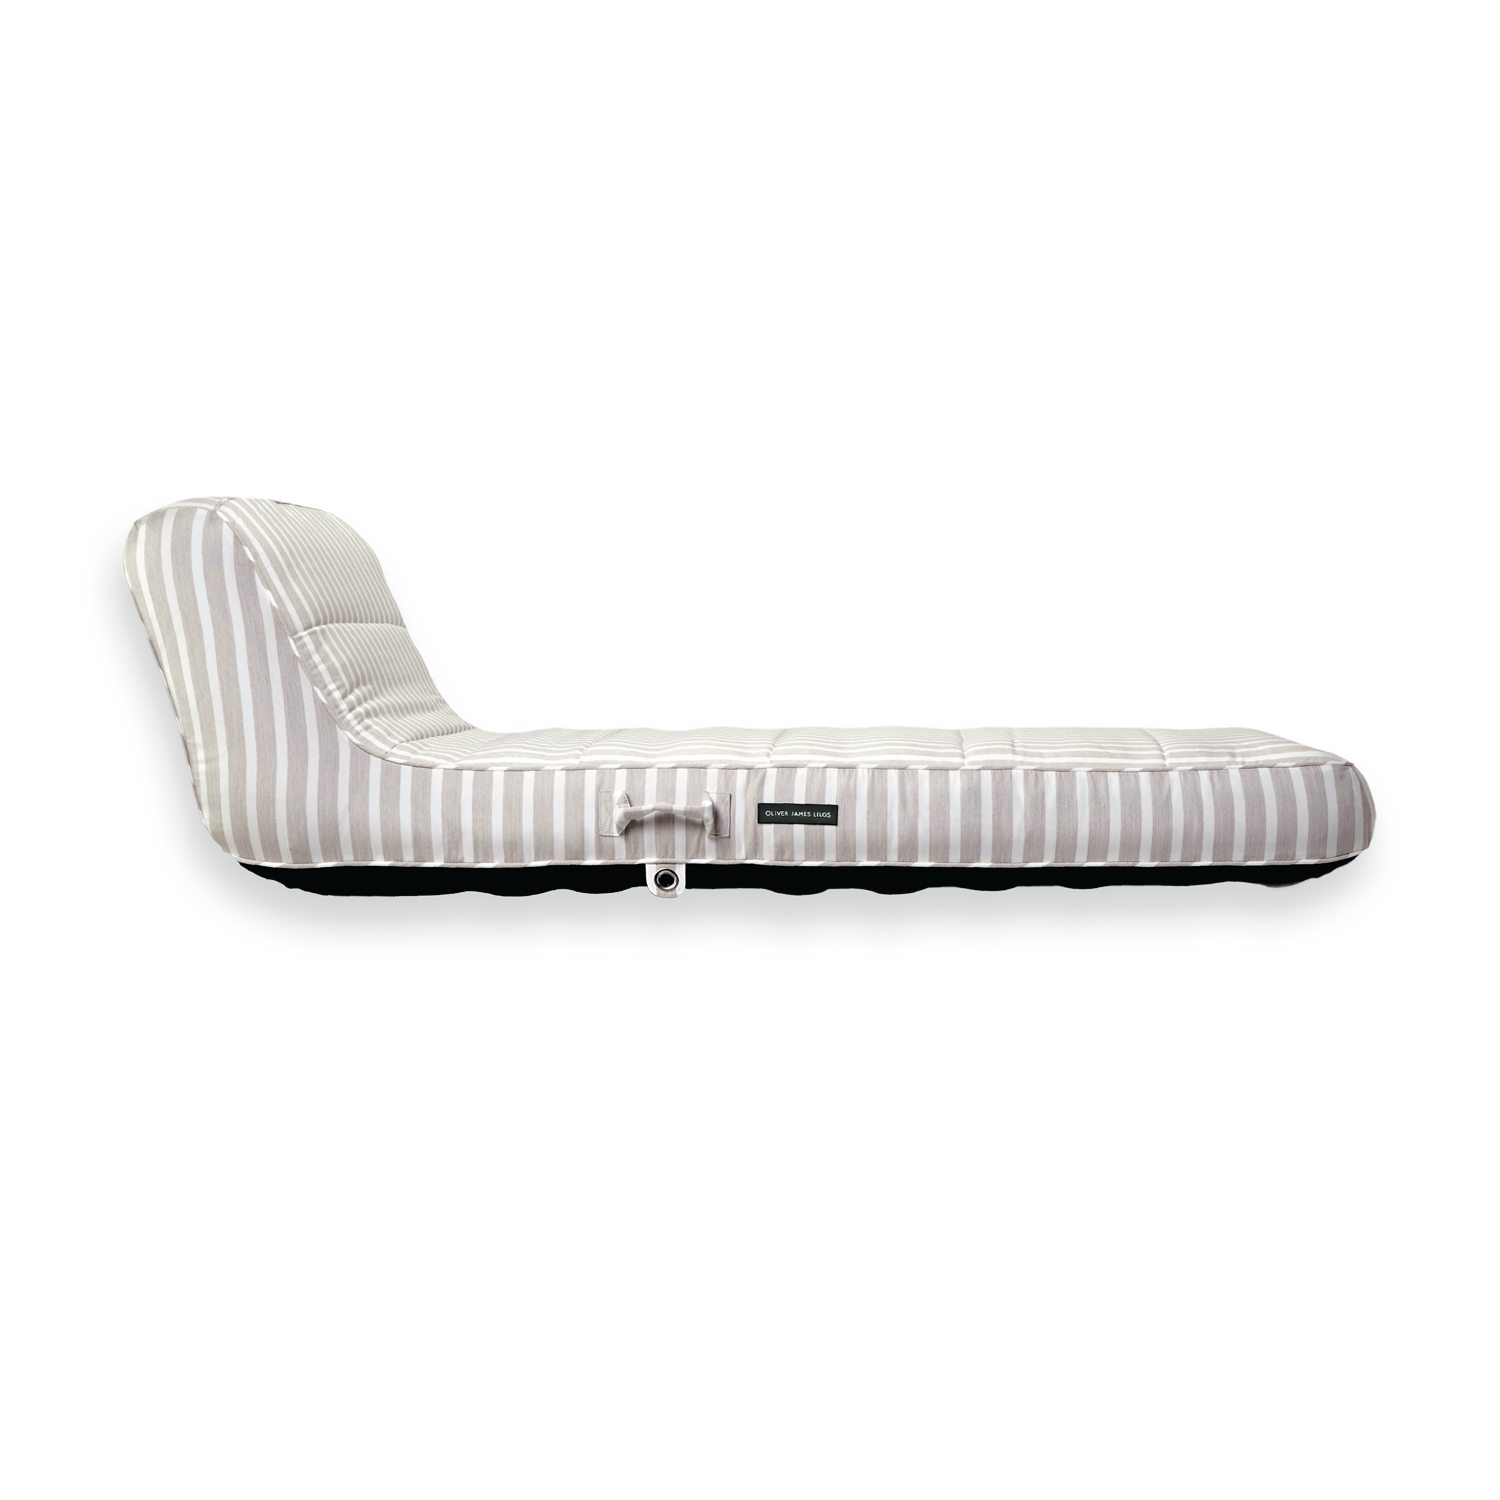 The side of a luxury pool float in white and beige striped fabric.